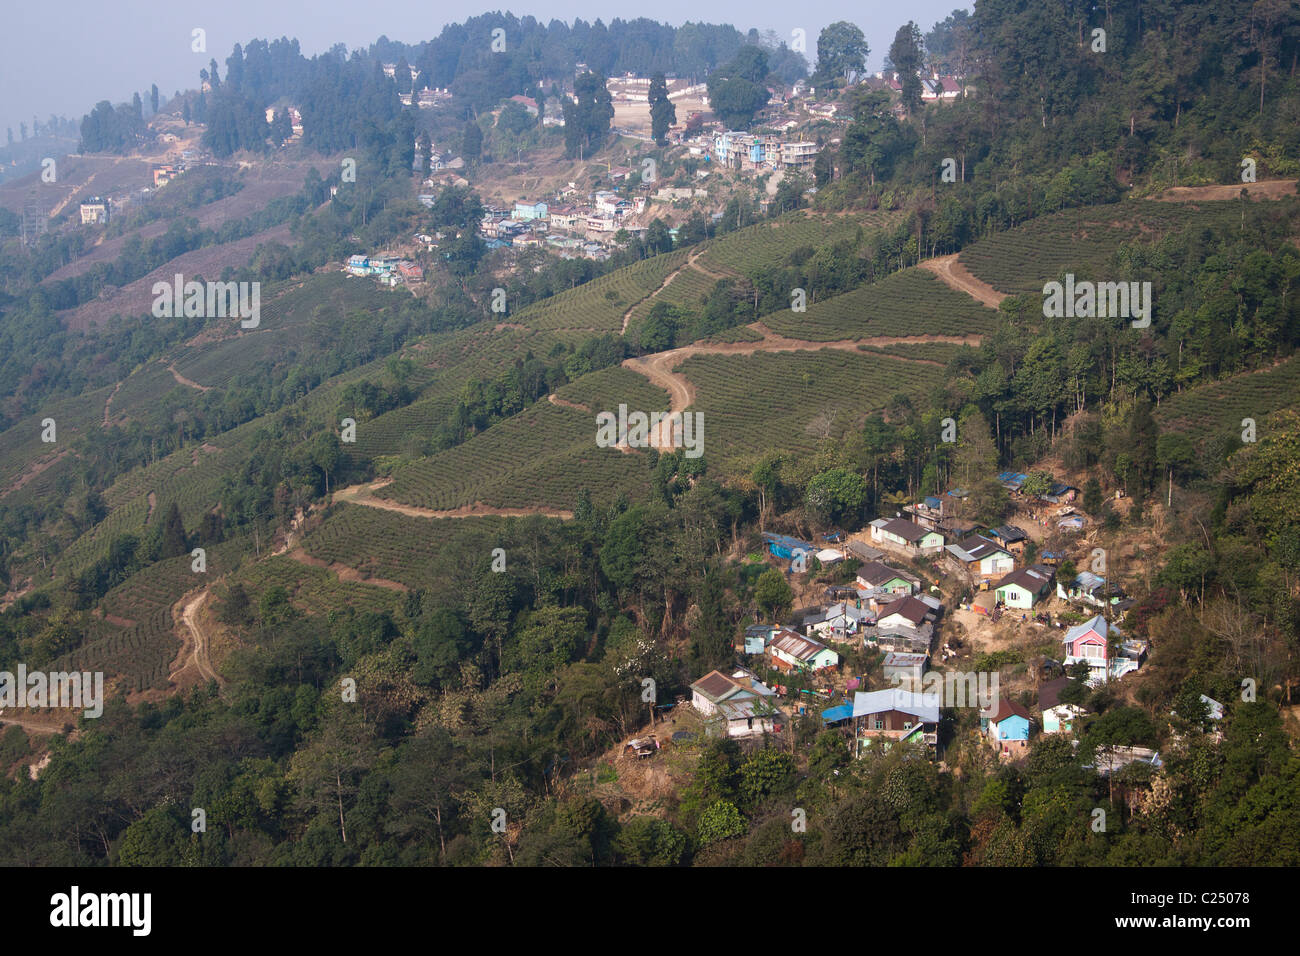 A hamlet cocooned by tea plantations in Darjeeling, West Bengal, India. Stock Photo